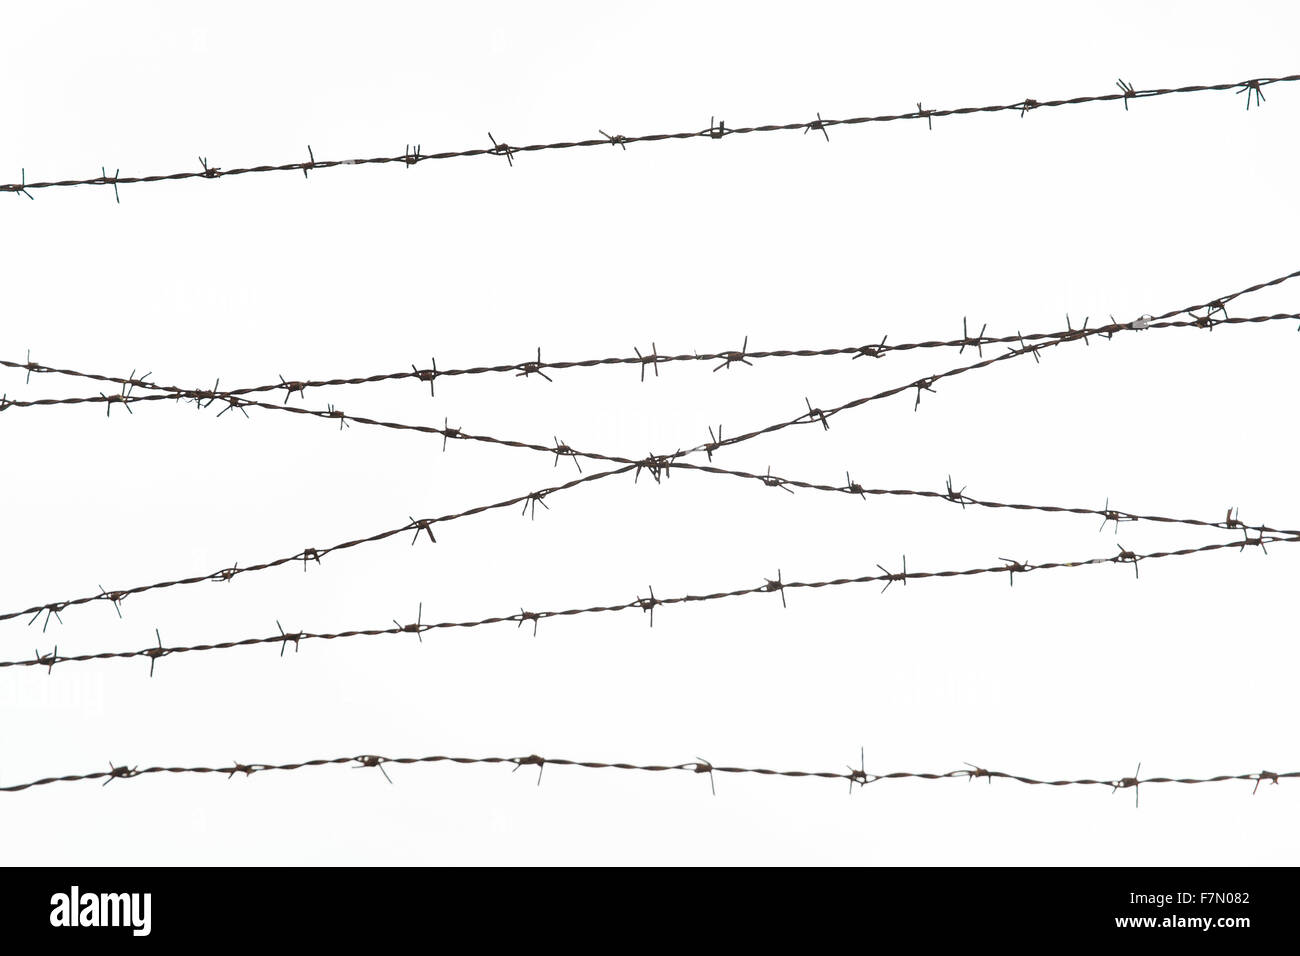 barb wire fence over gray sky Stock Photo